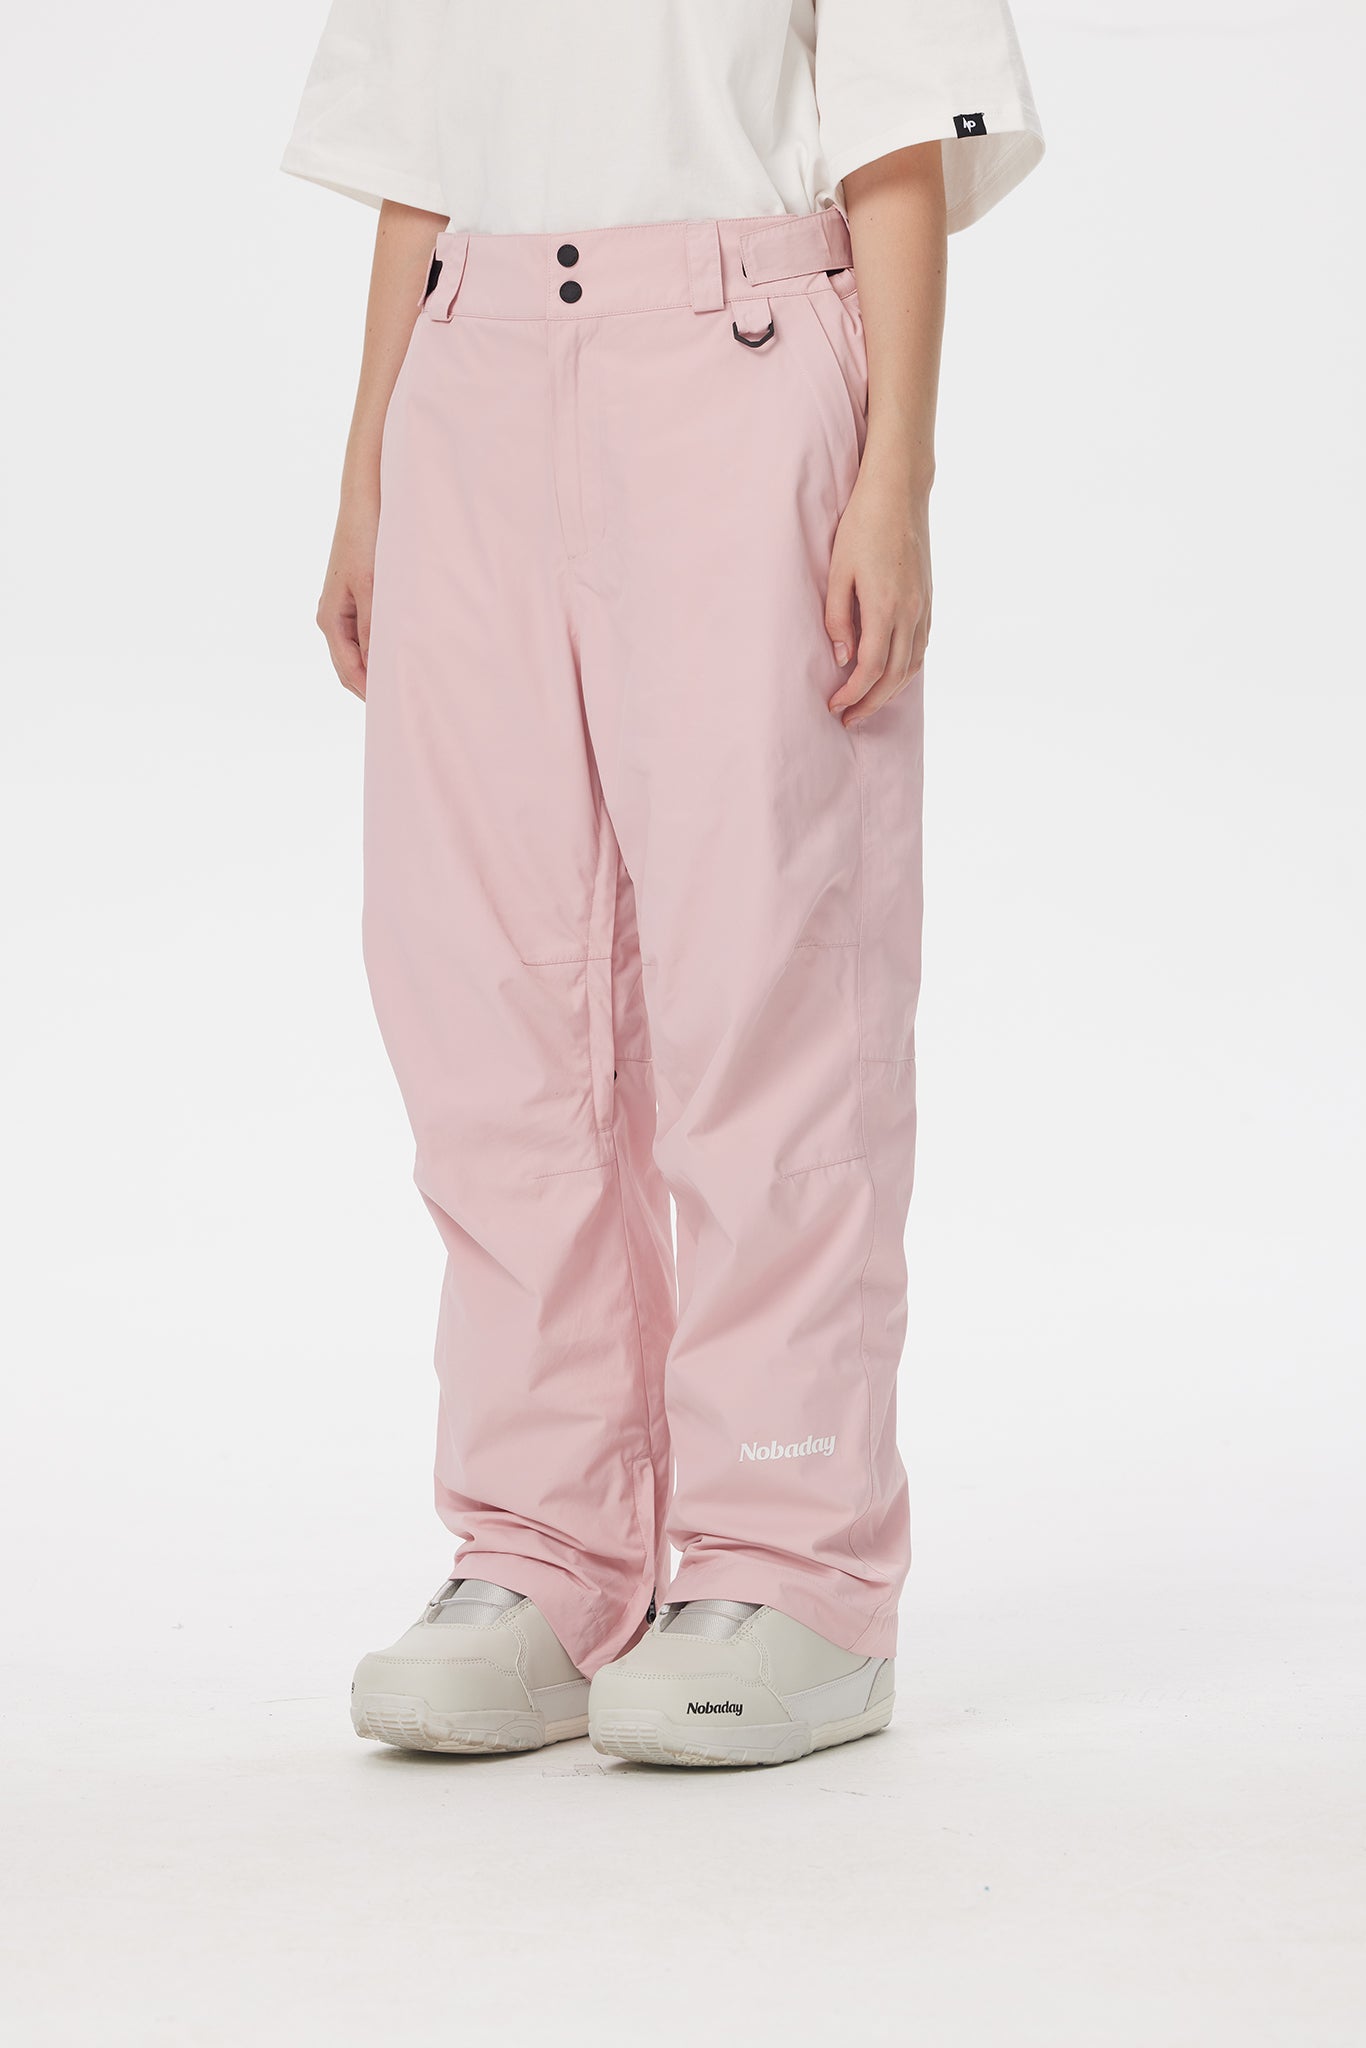 DAWN 2L All-Weather Snow Pants – NOBADAY